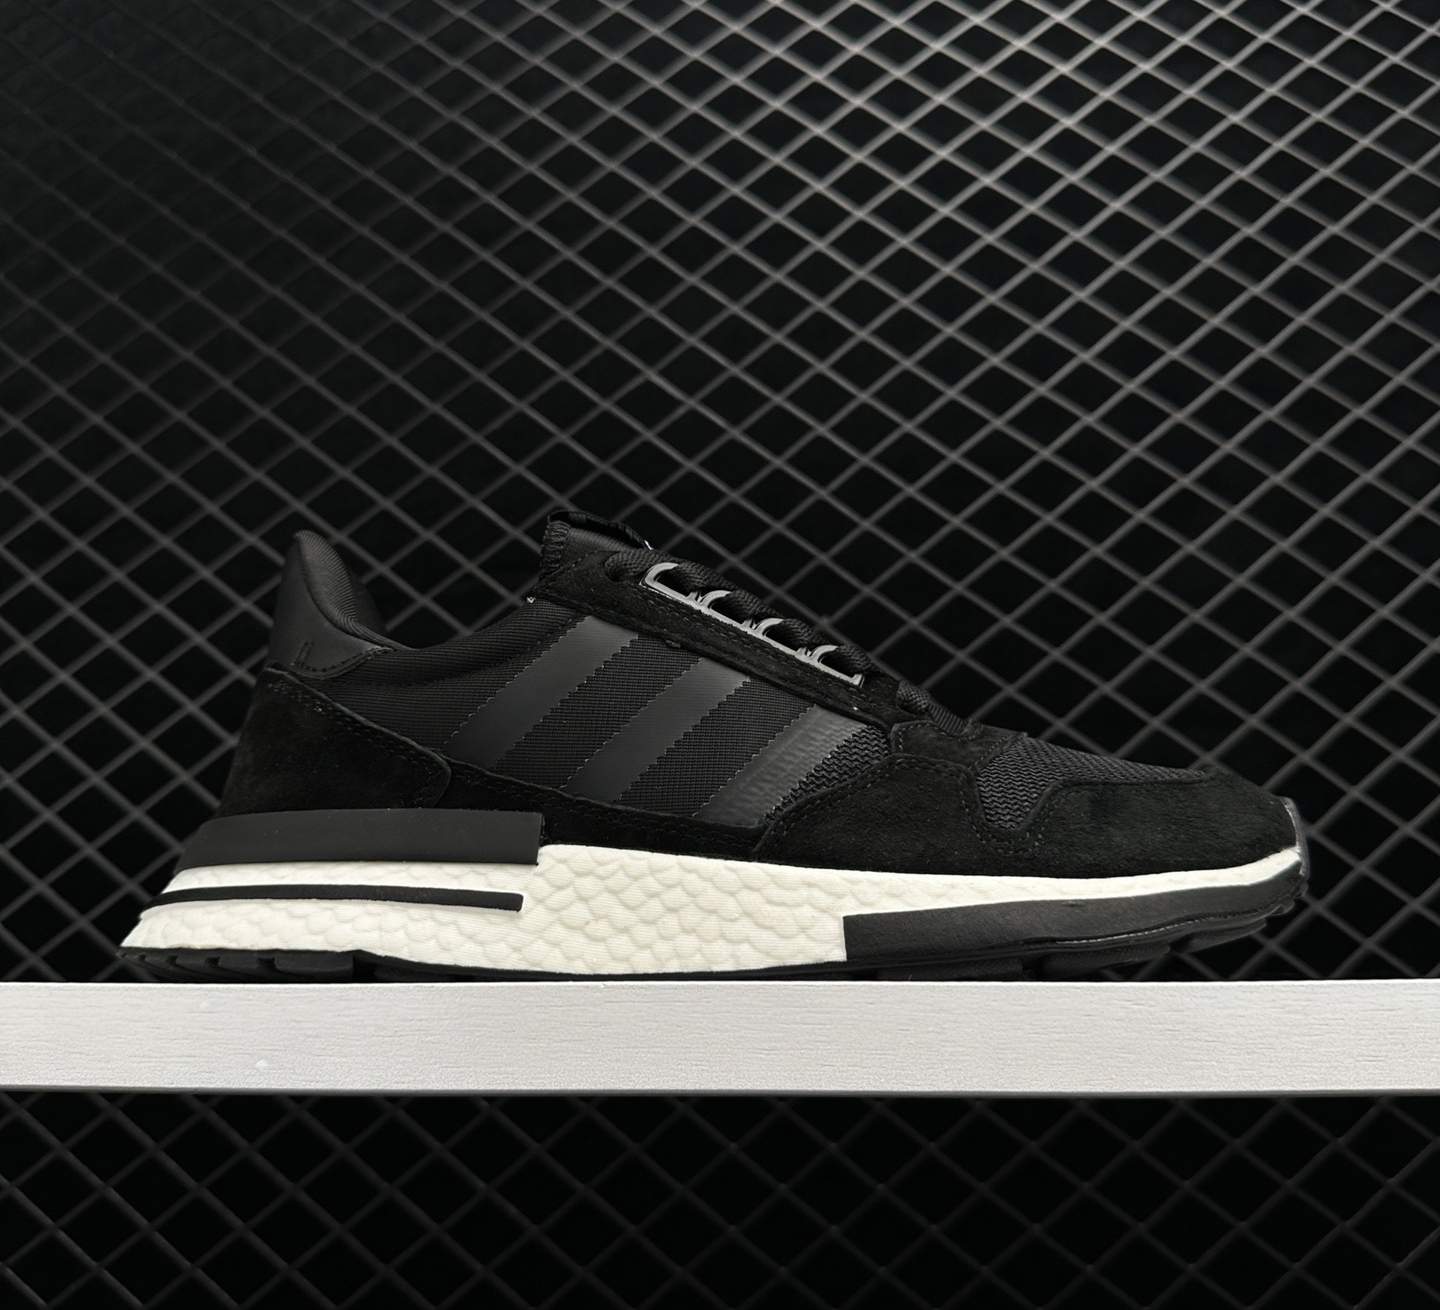 Adidas ZX 500 RM 'Core Black' B42227 - Stylish and Comfortable Sneakers